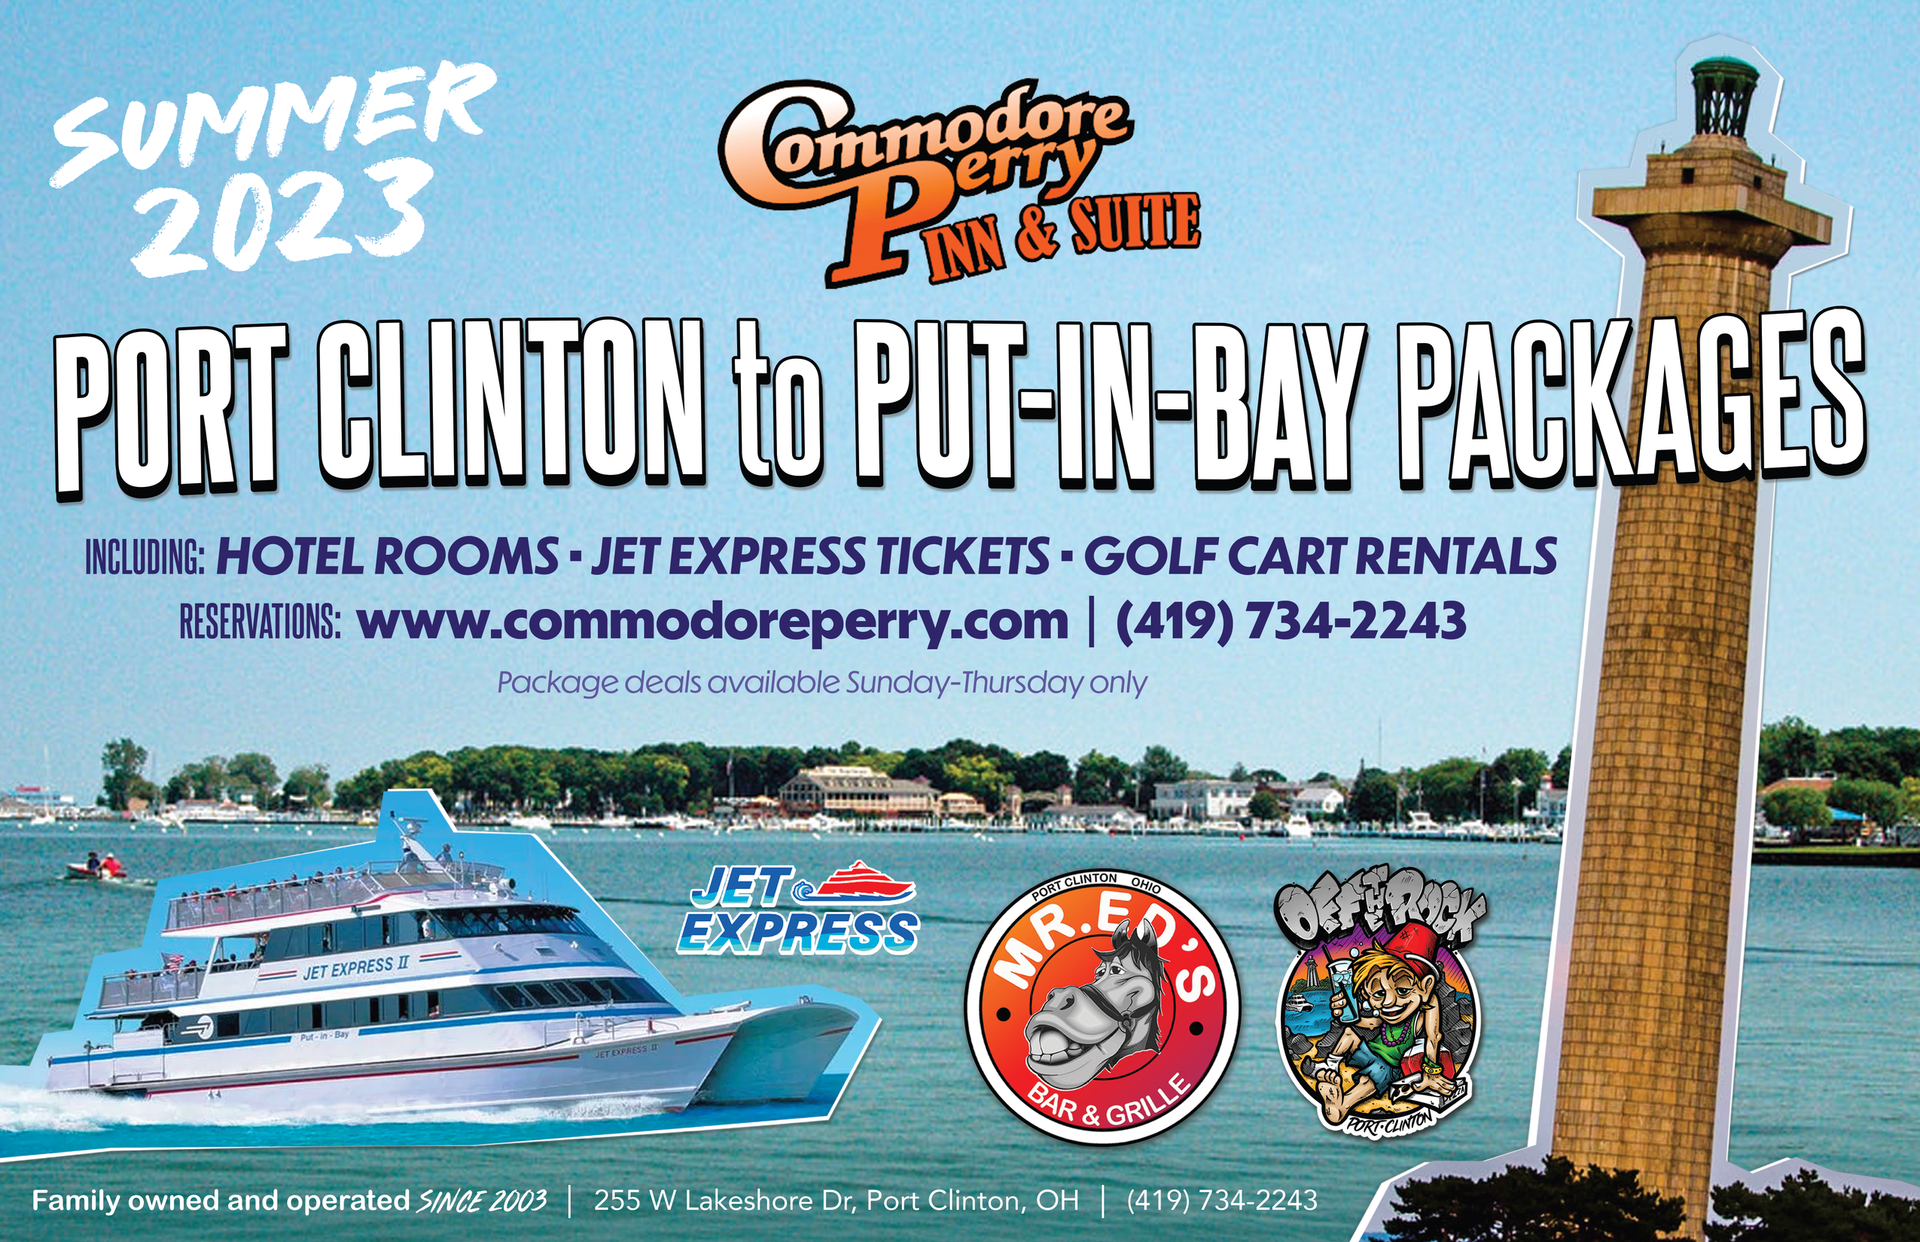 Port Clinton to Put-in-Bay Ohio, Packages from Commodore Perry